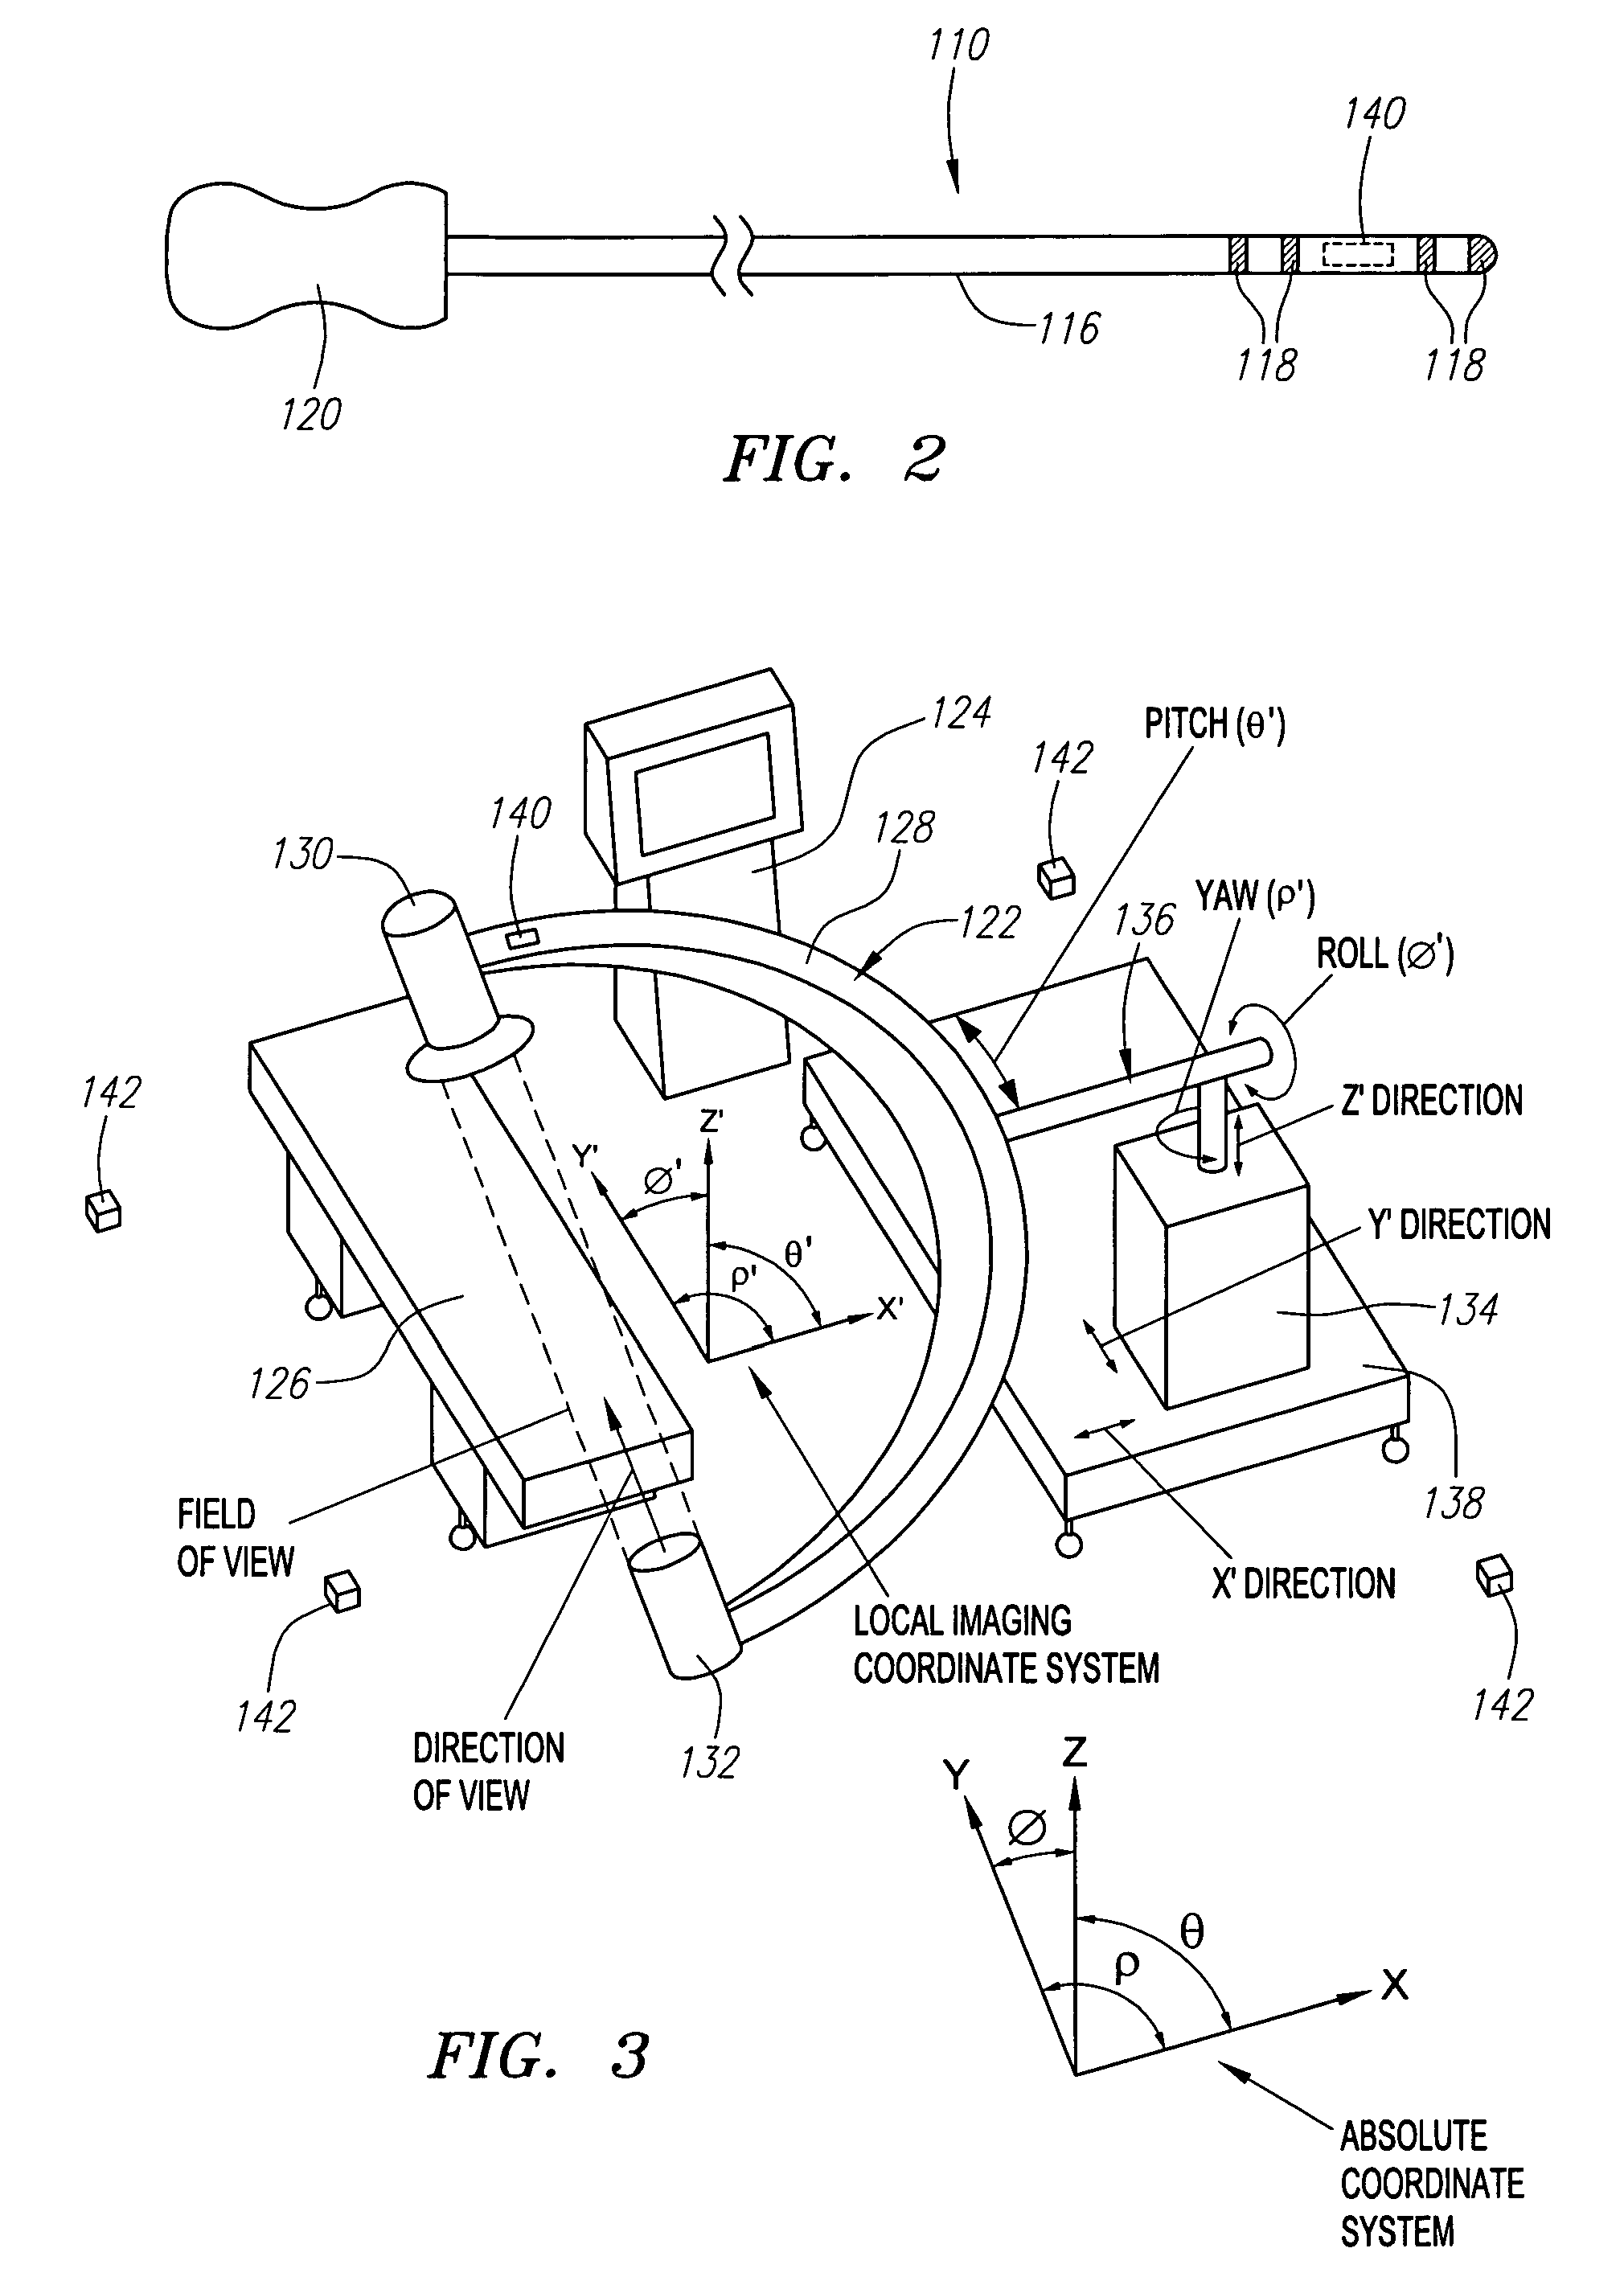 Automated manipulation of imaging device field of view based on tracked medical device position